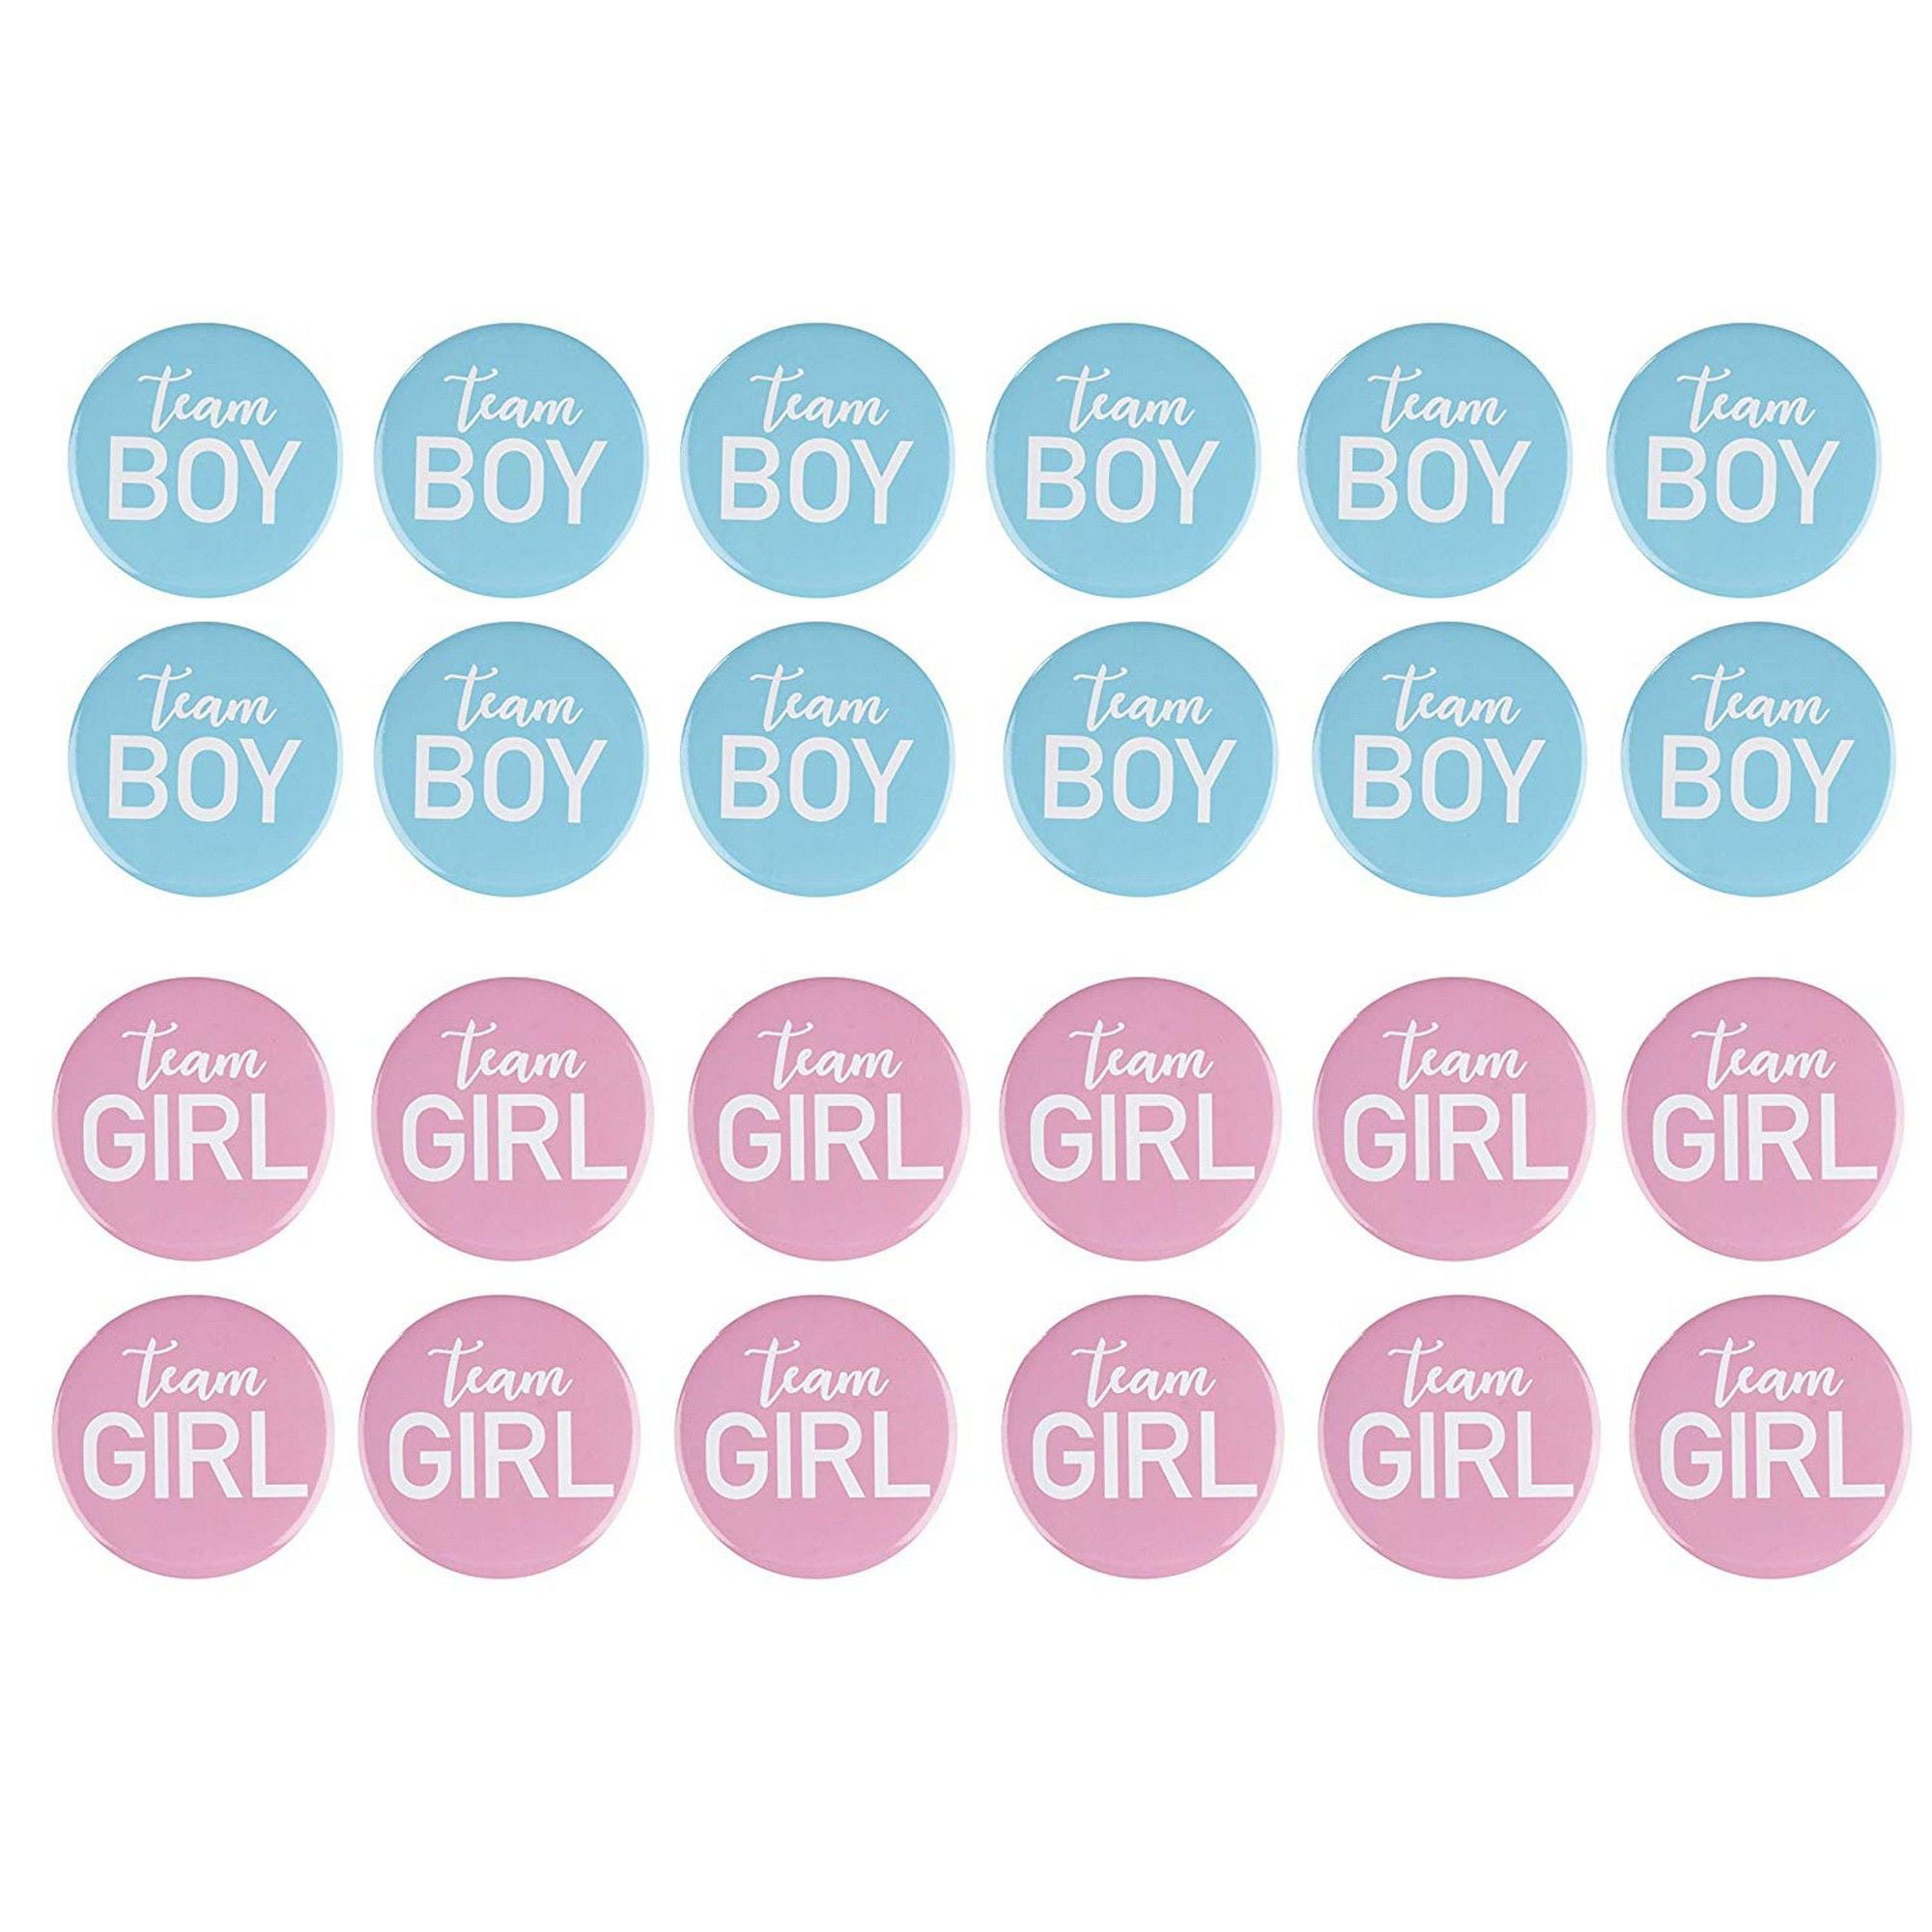 24 TWIN BABY SHOWER BABY CARRIAGE SEED FAVORS 12 BOY BLUE 12 PINK GIRL CUTE! 